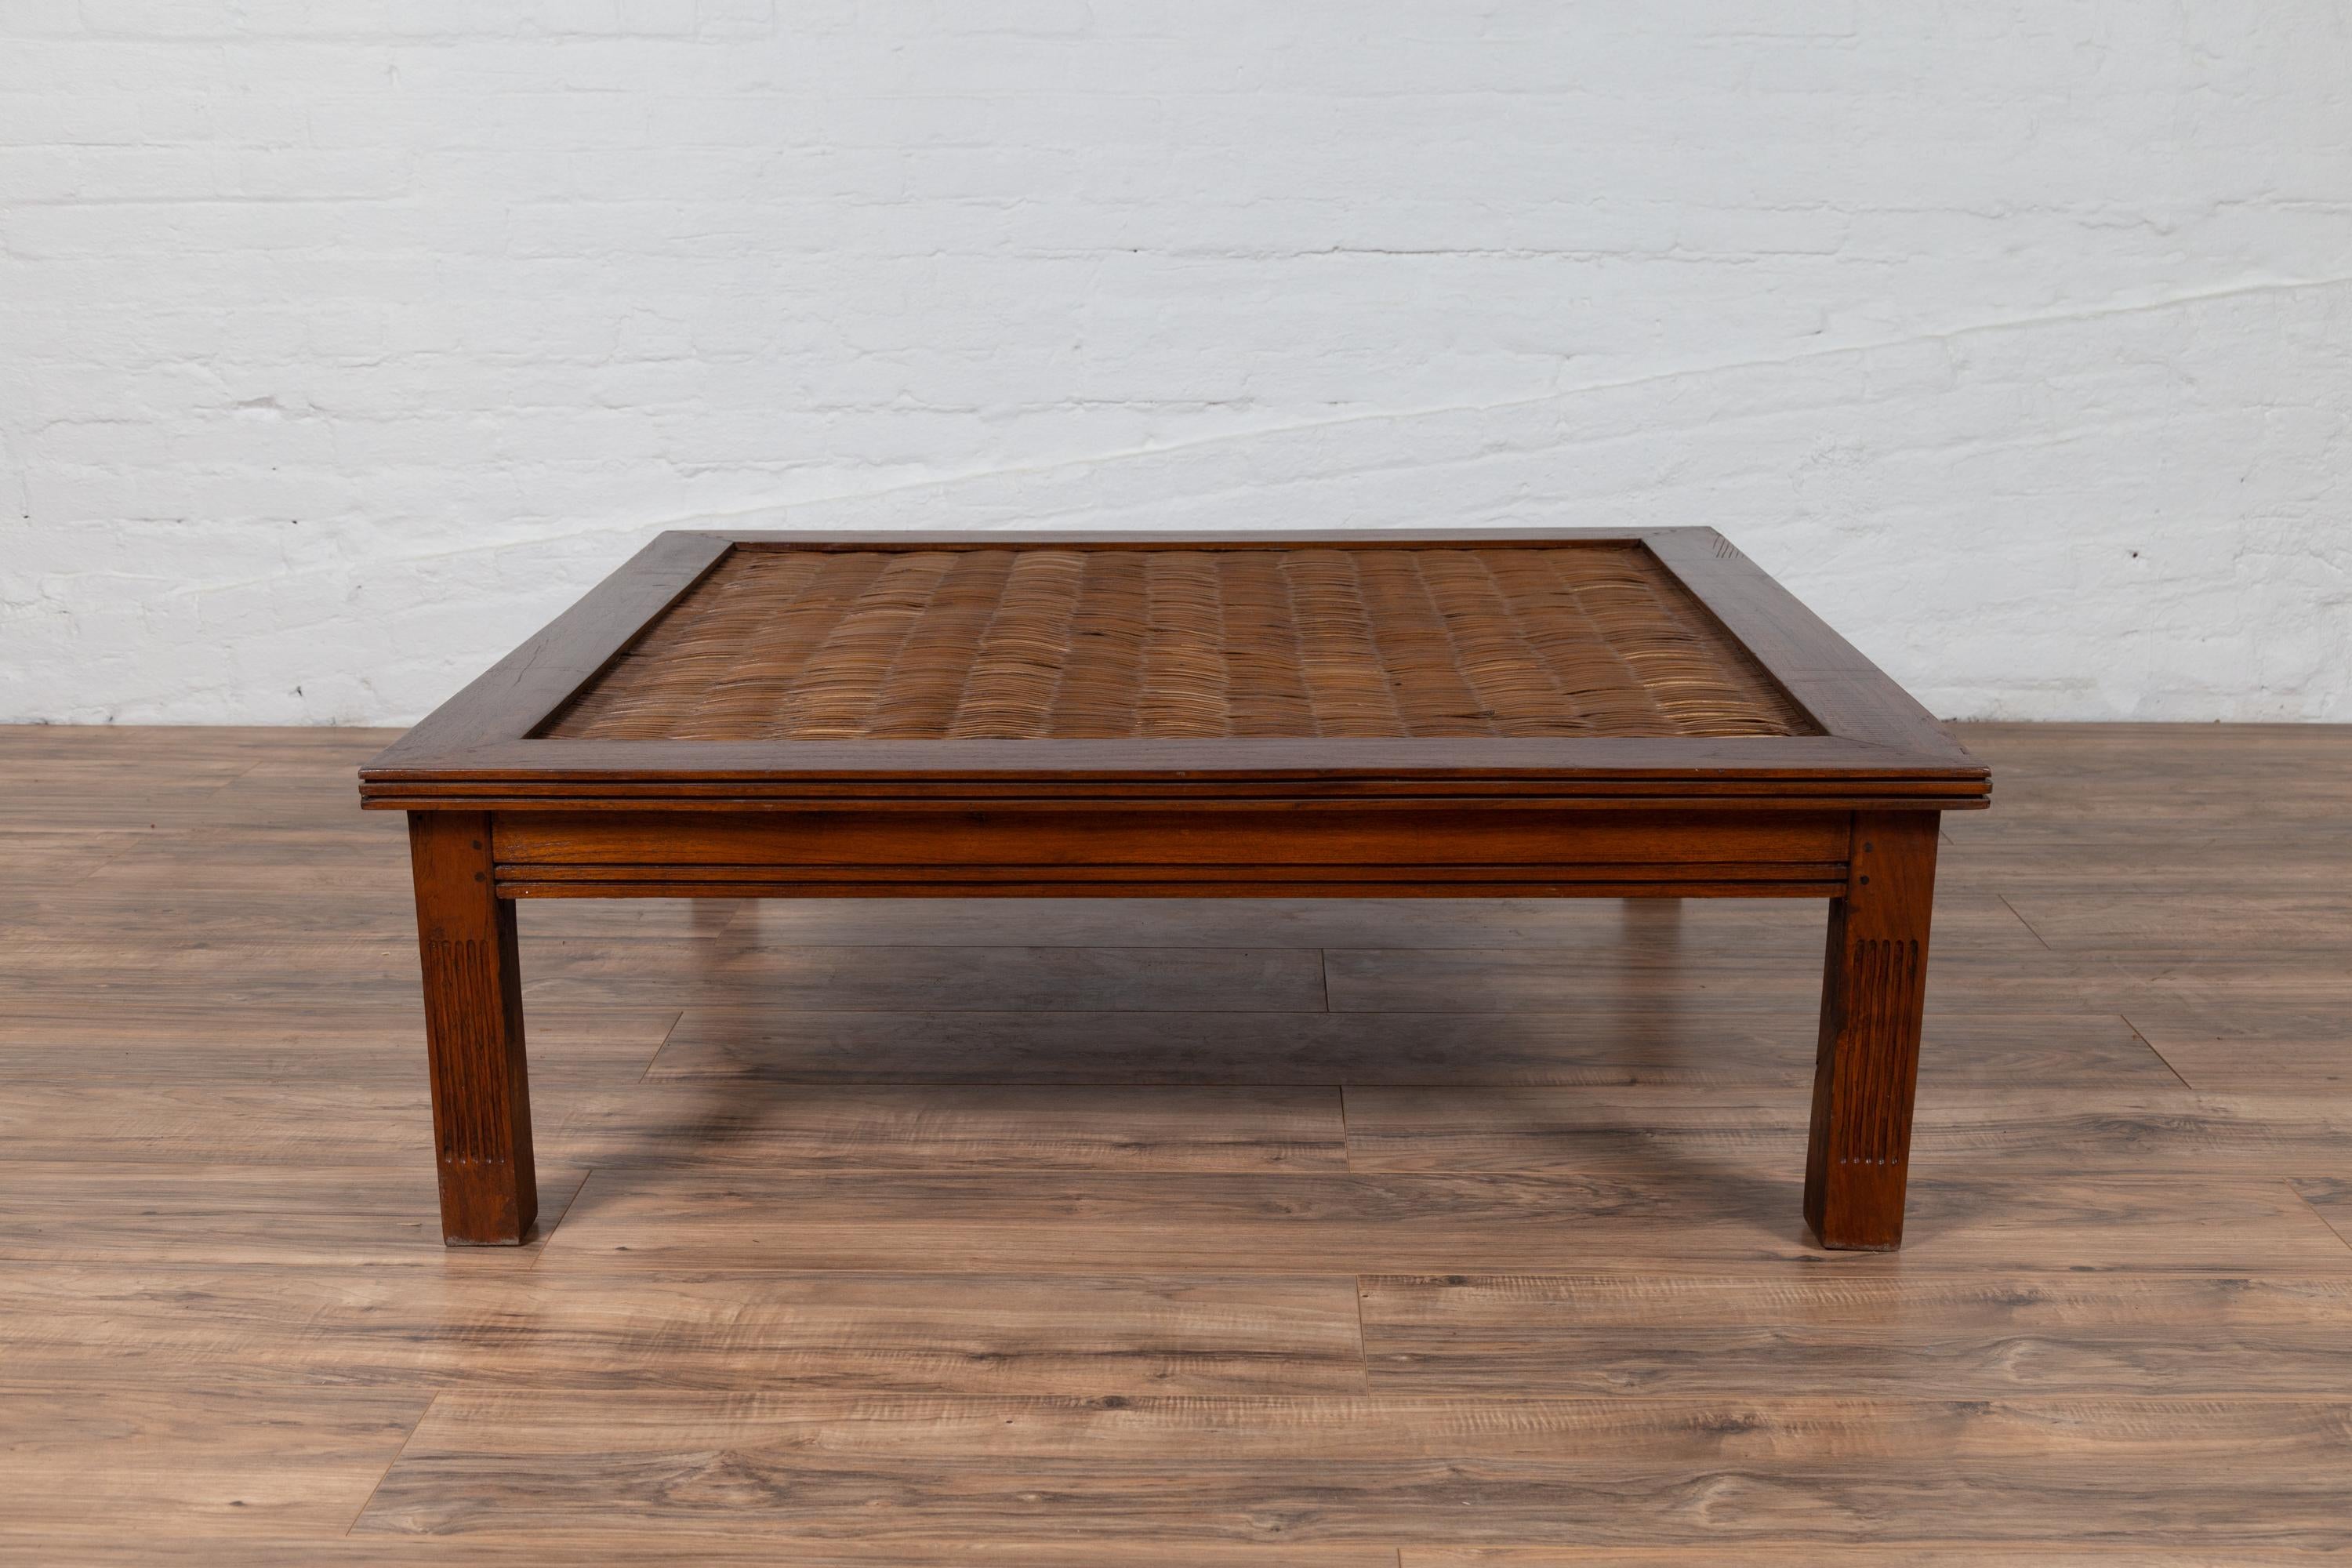 An antique Chinese square-shaped elmwood coffee table from the early 20th century, with handmade rattan inset and fluted motifs. Born in China during the early years of the 20th century, this charming elm coffee table features a rectangular top,